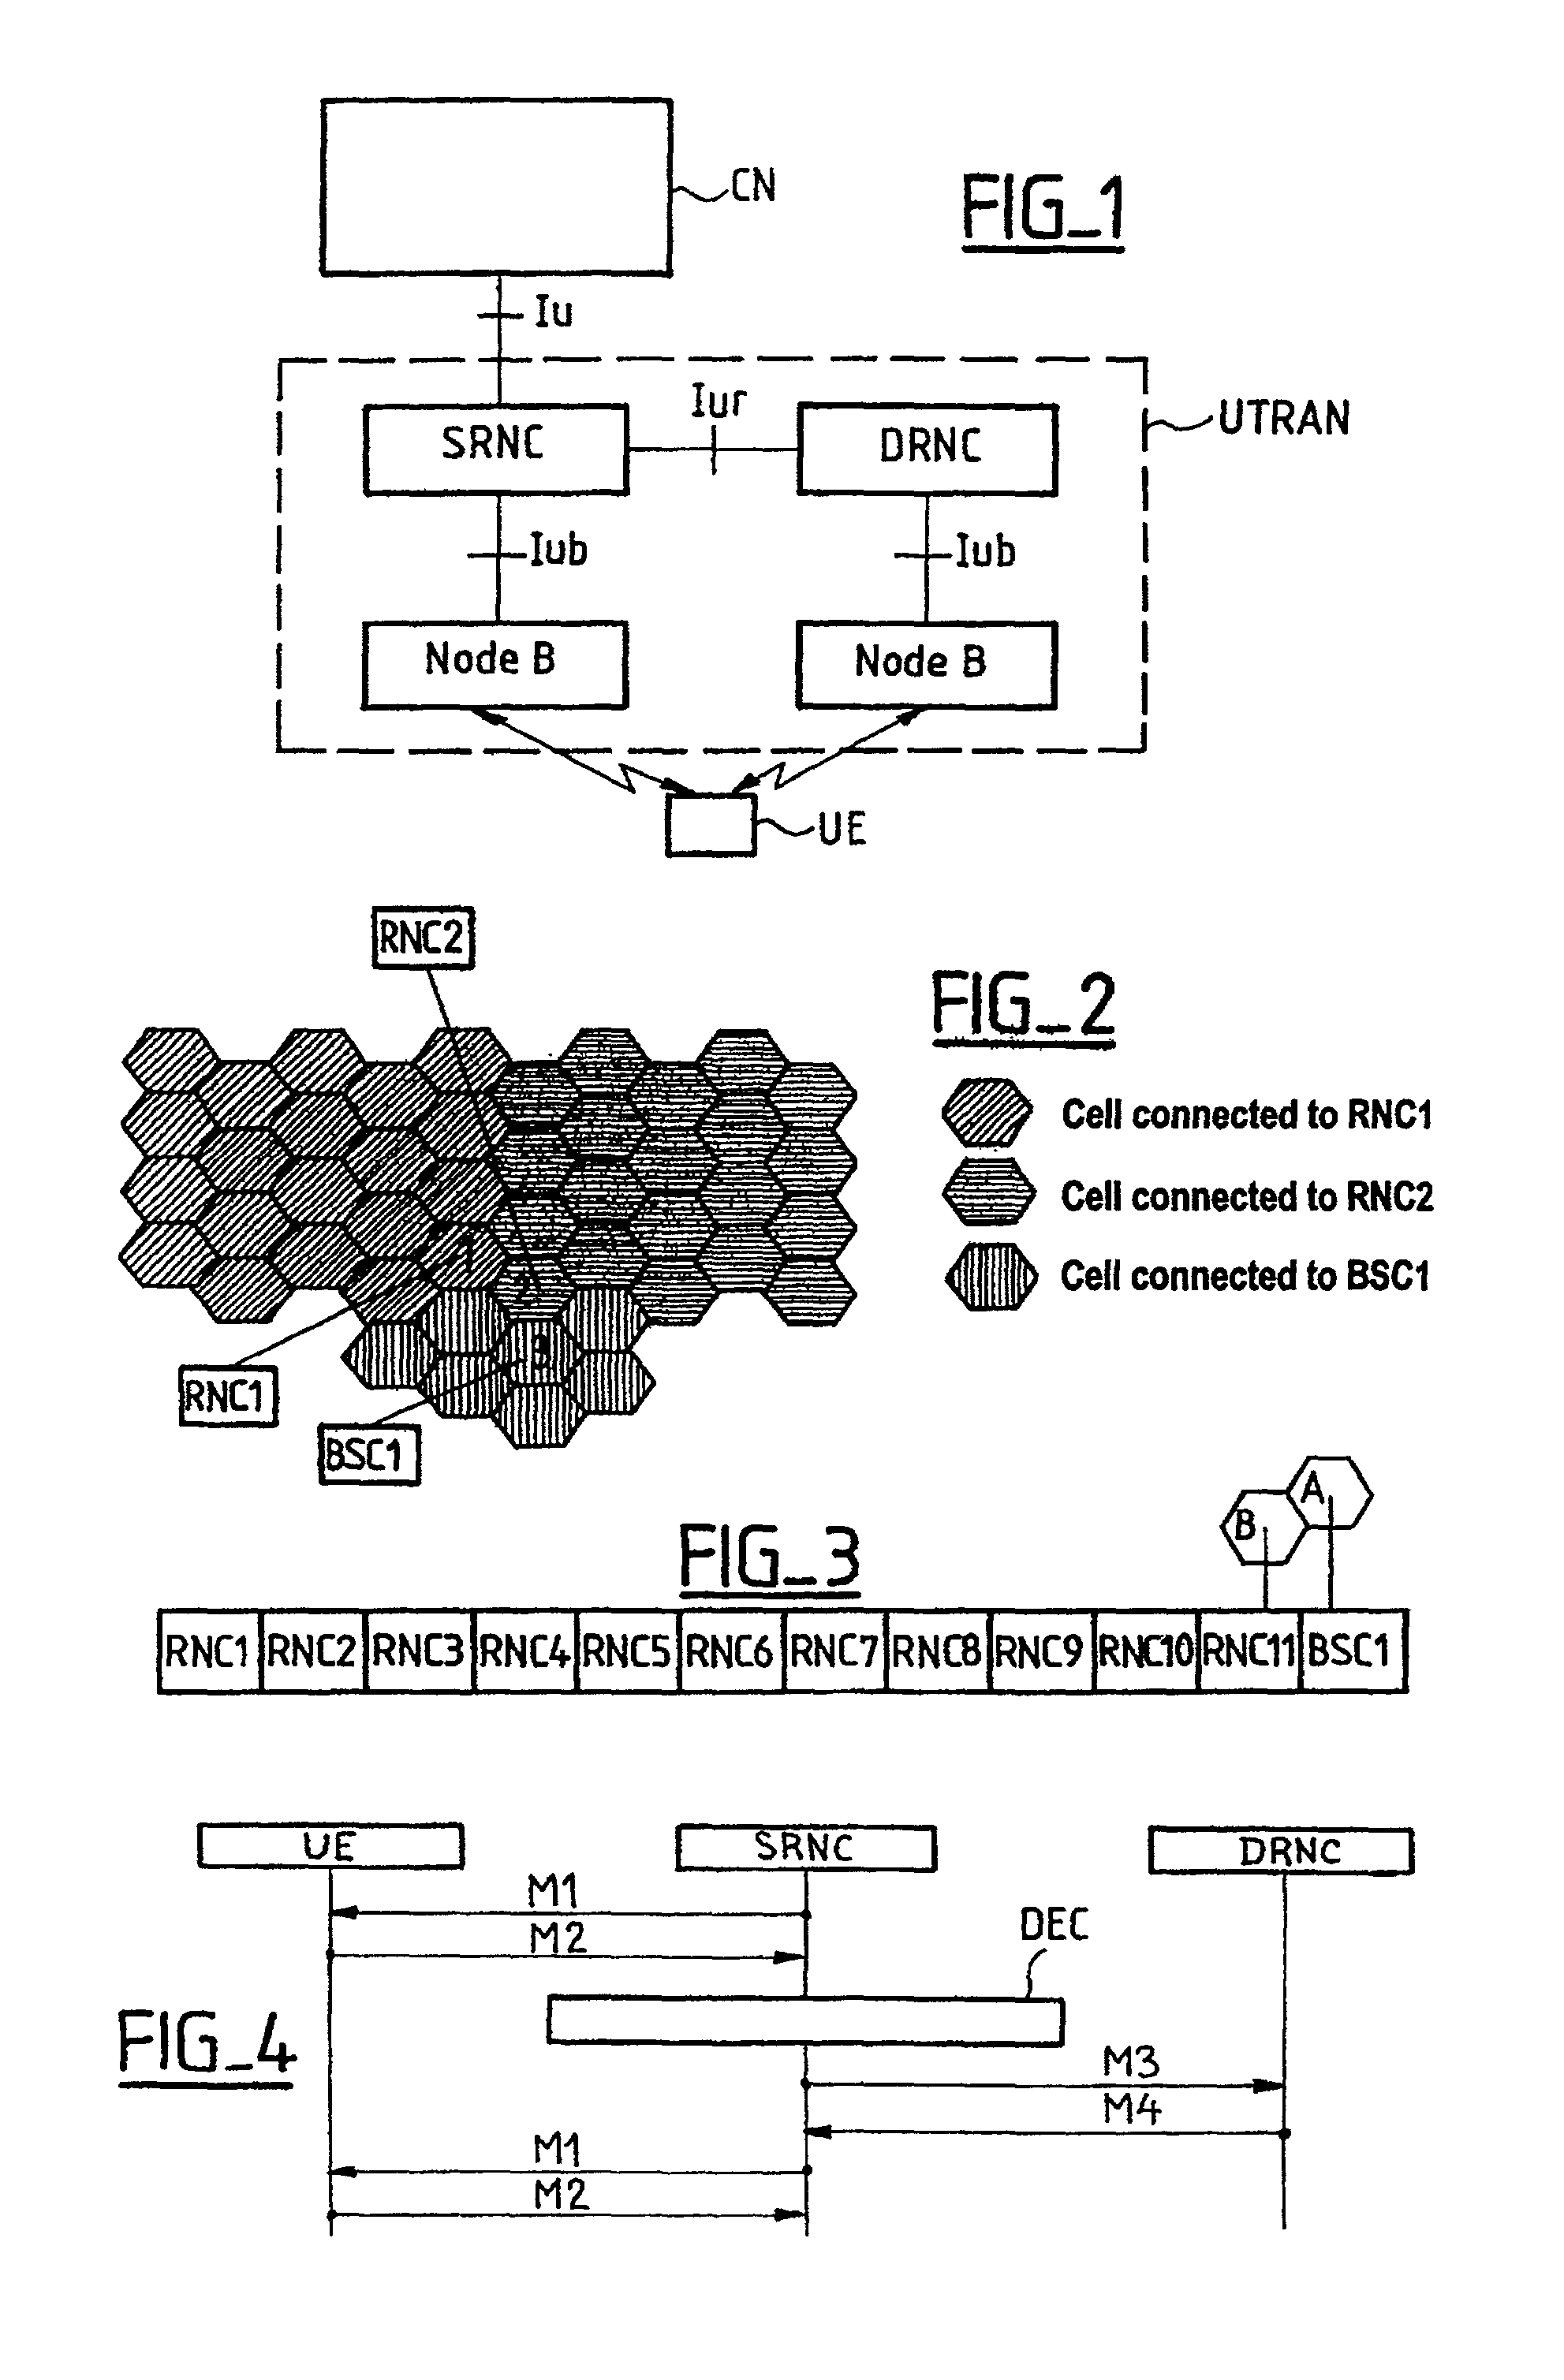 Intersystem call transfer method for use in cellular mobile radio systems